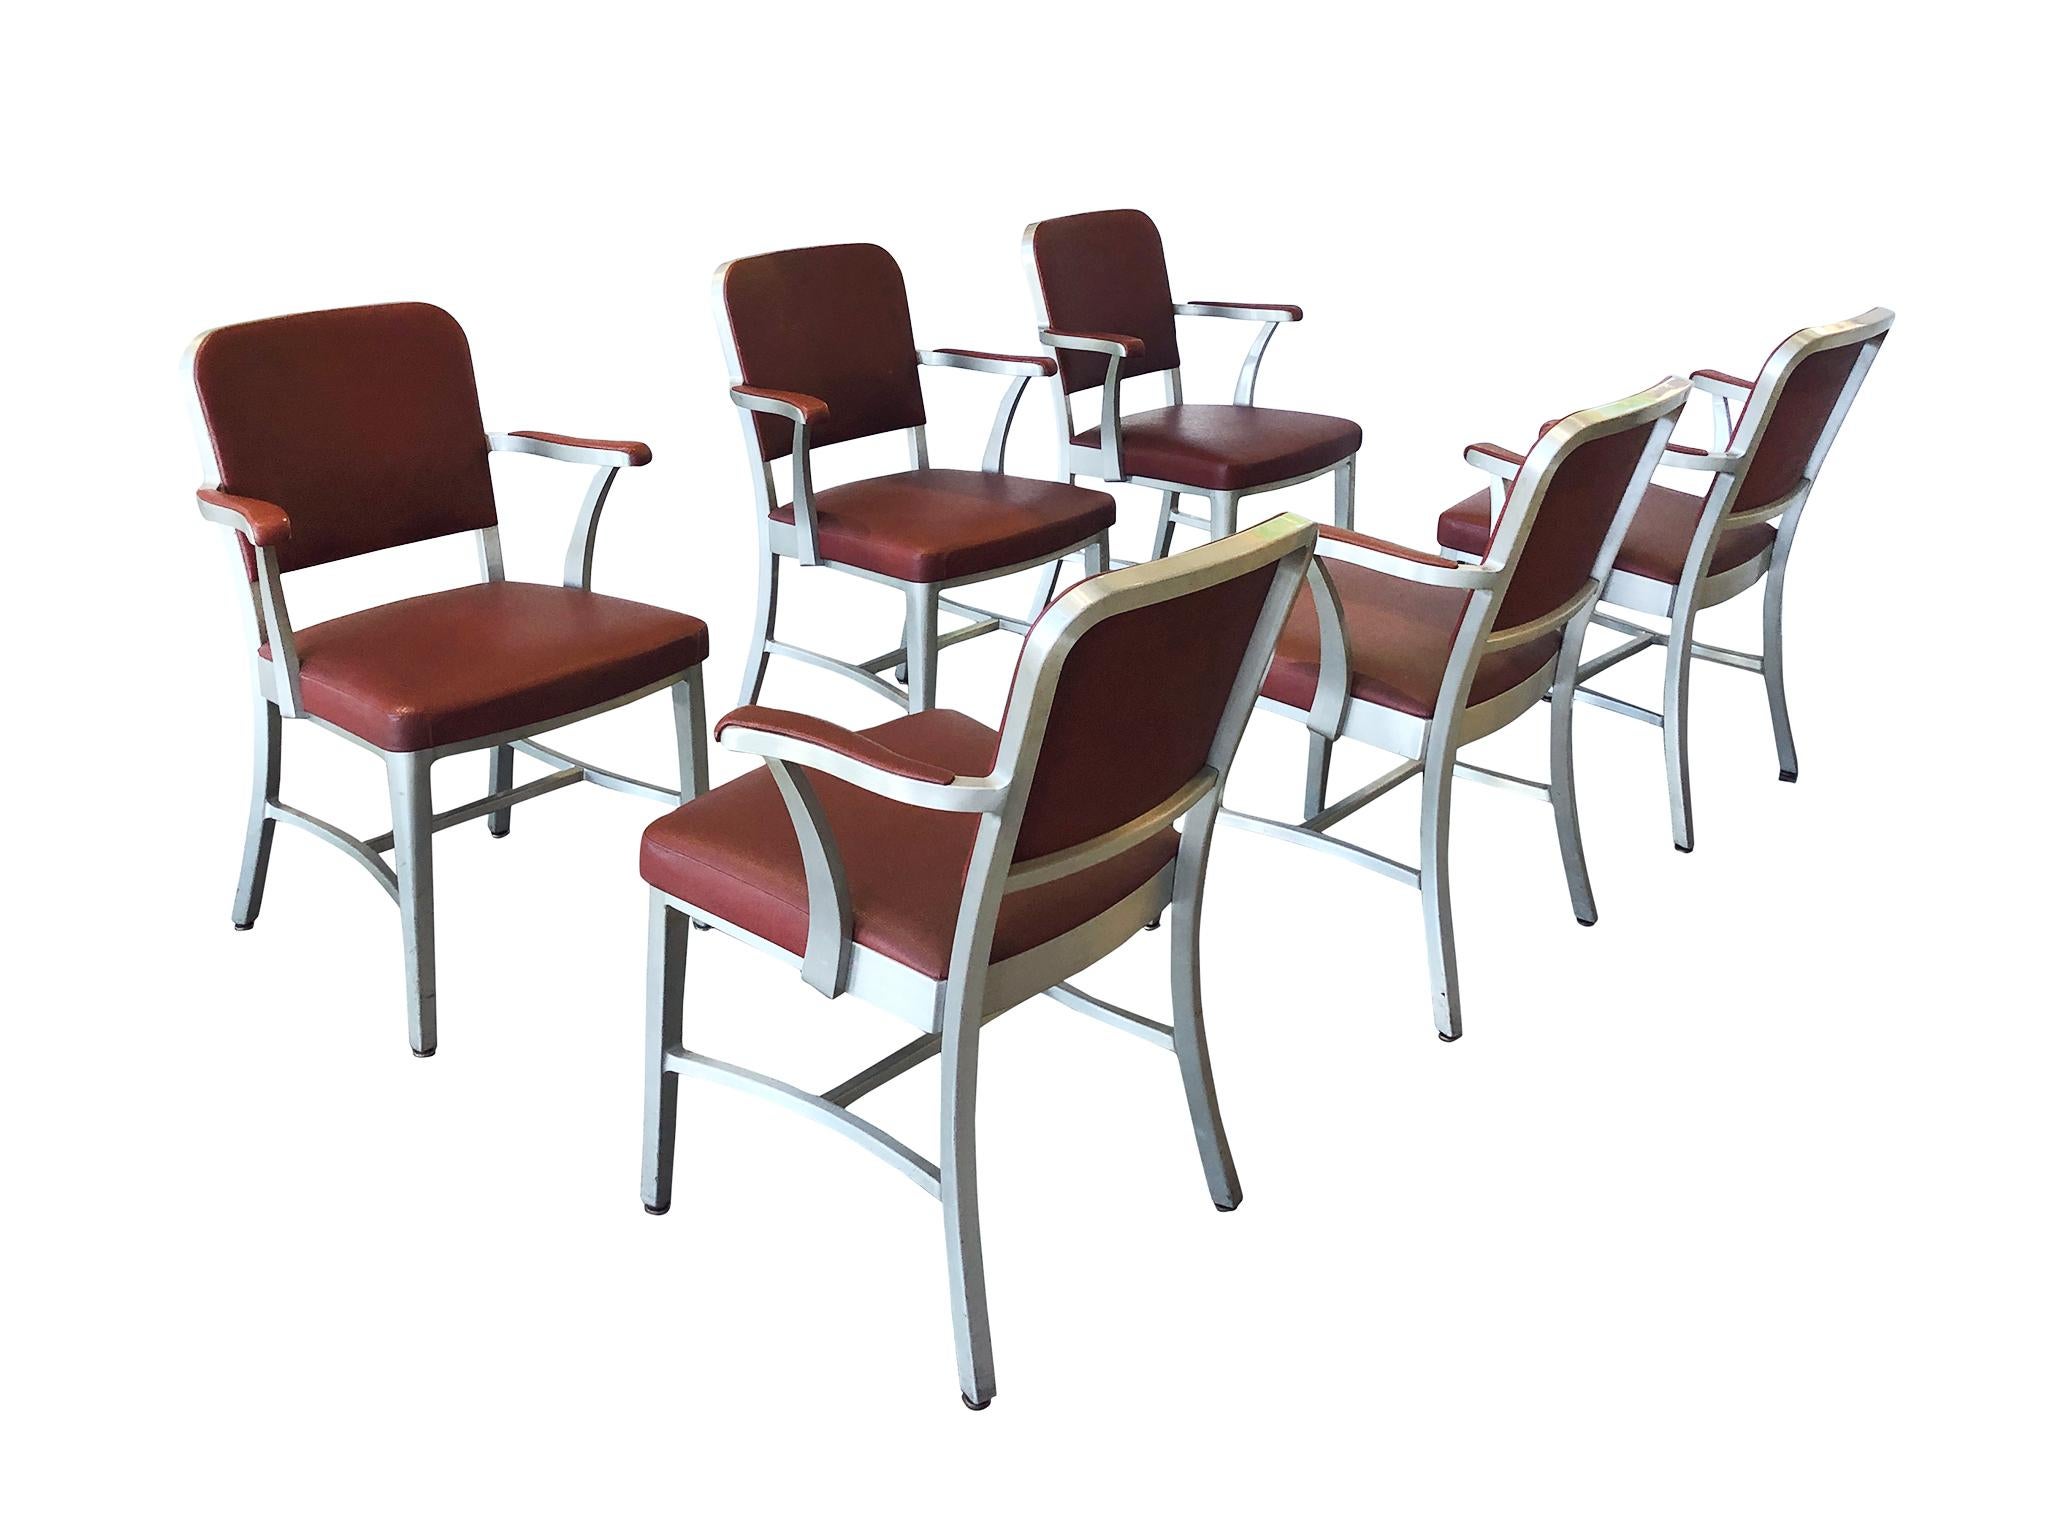 Mid-Century Modern Set of 6 GoodForm Aluminum Armchairs by the General Fireproofing Co.